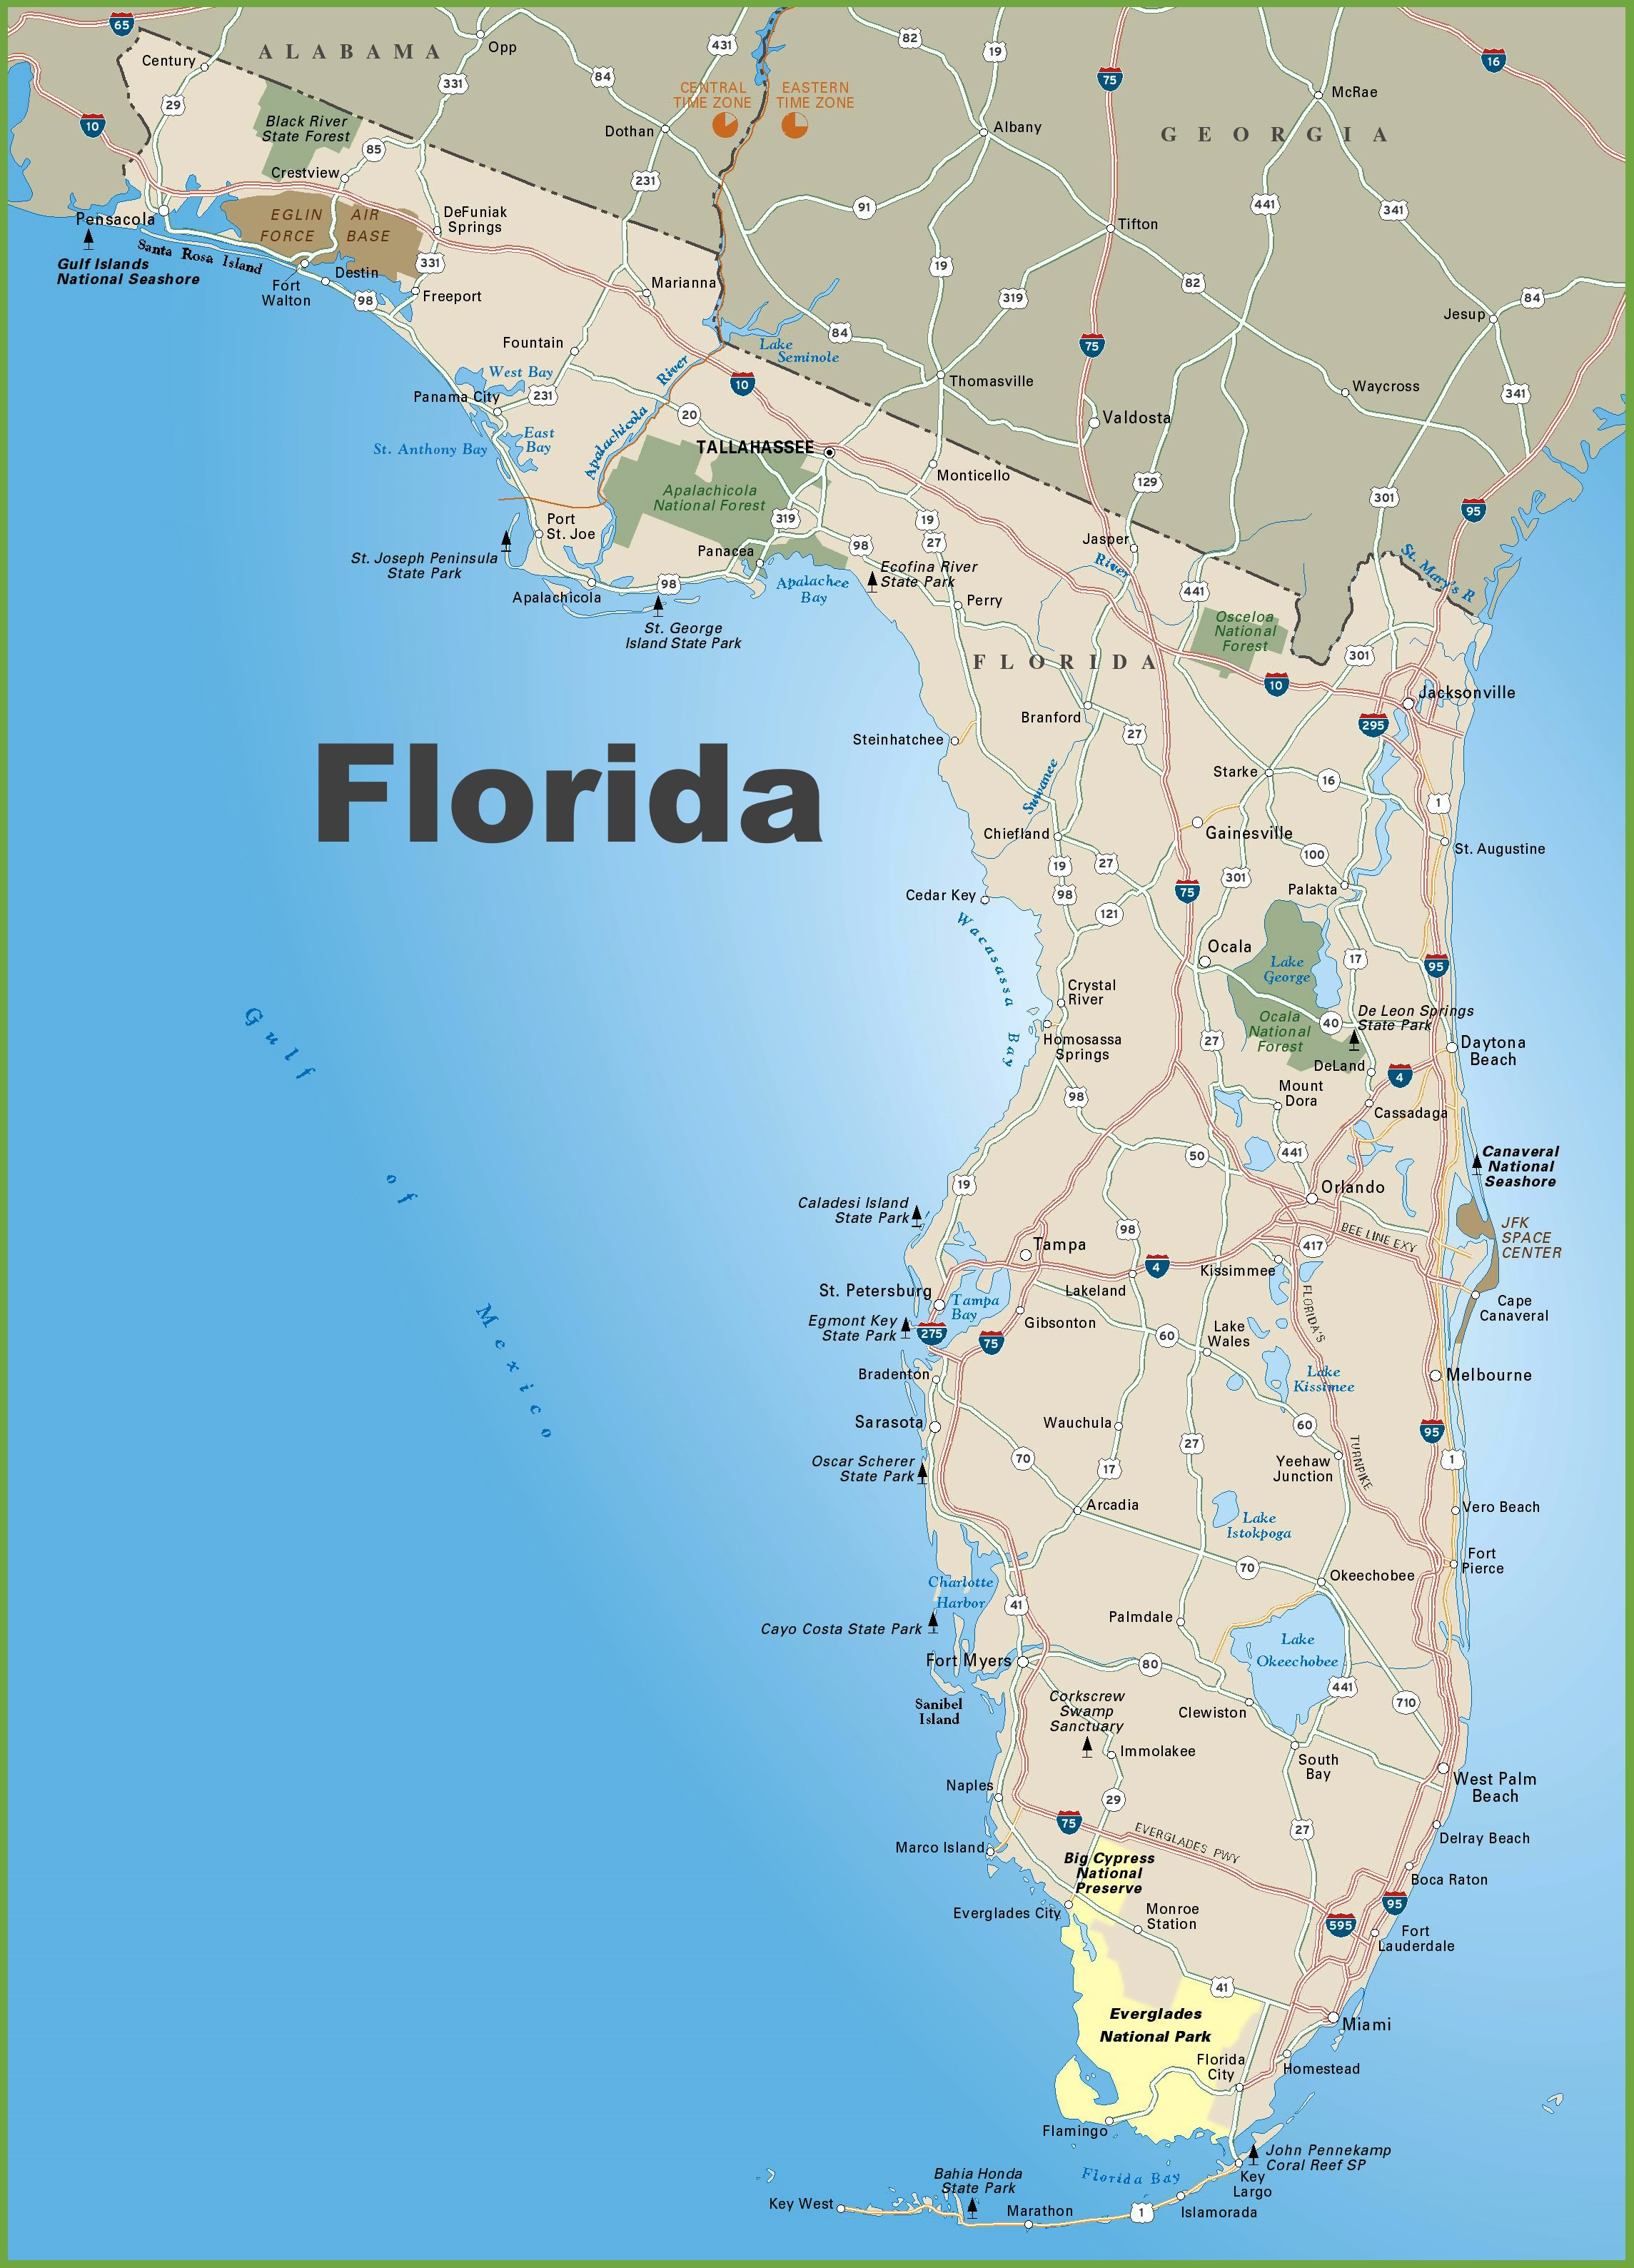 Map Of Florida - On-Scenic-Routes - I Want A Map Of Florida